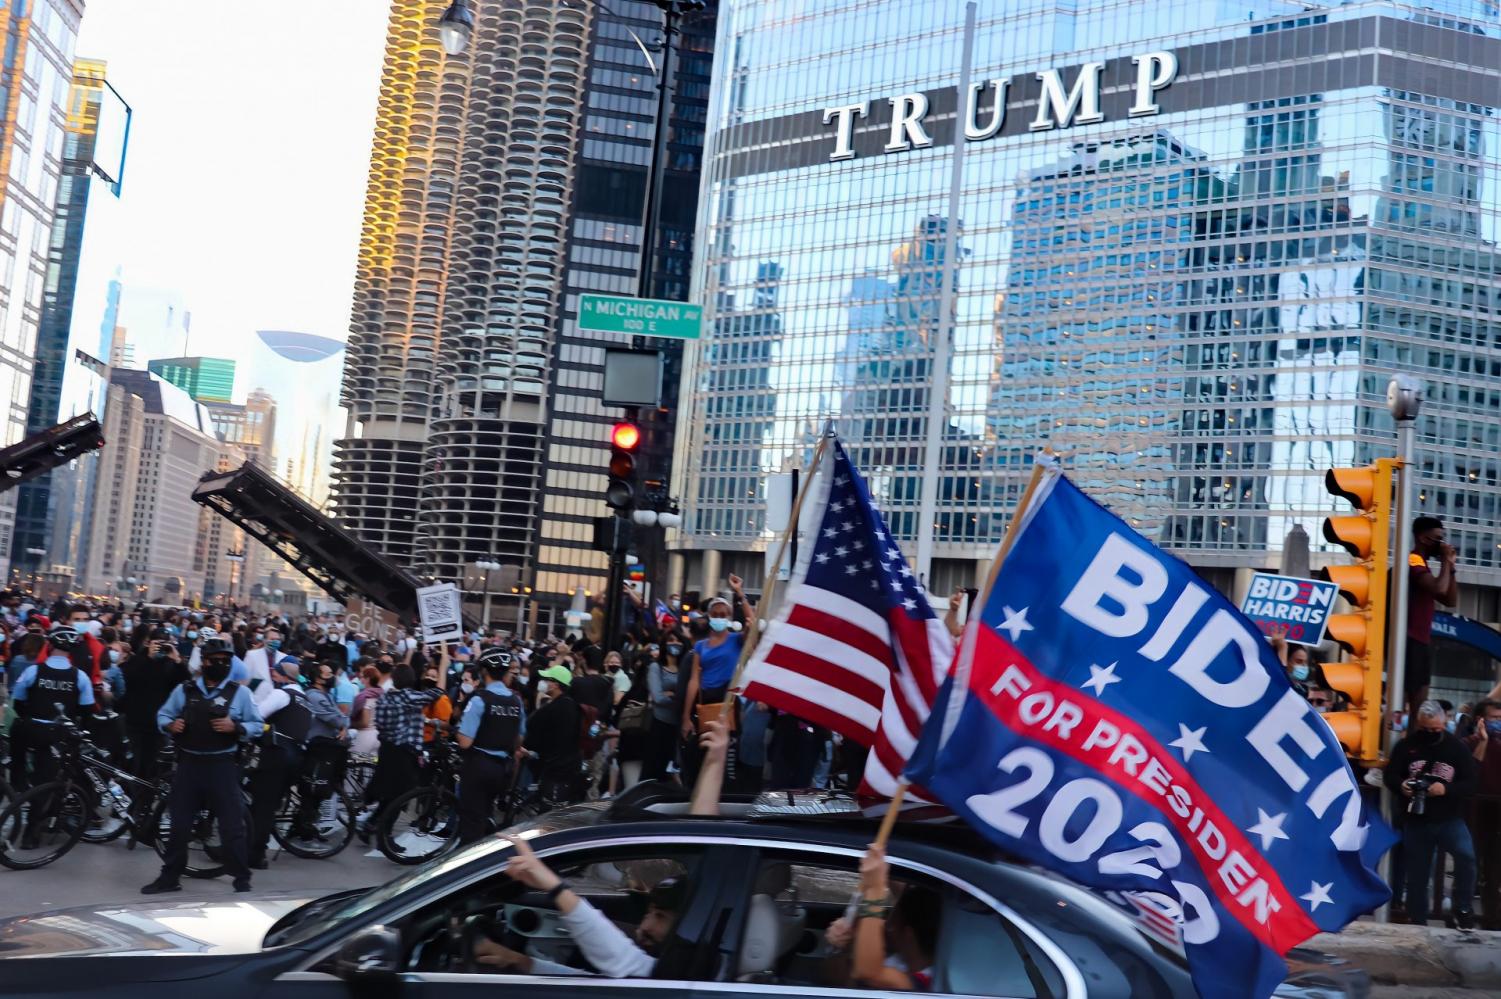 Thousands+gather+outside+Trump+Tower+after+Biden+wins+election